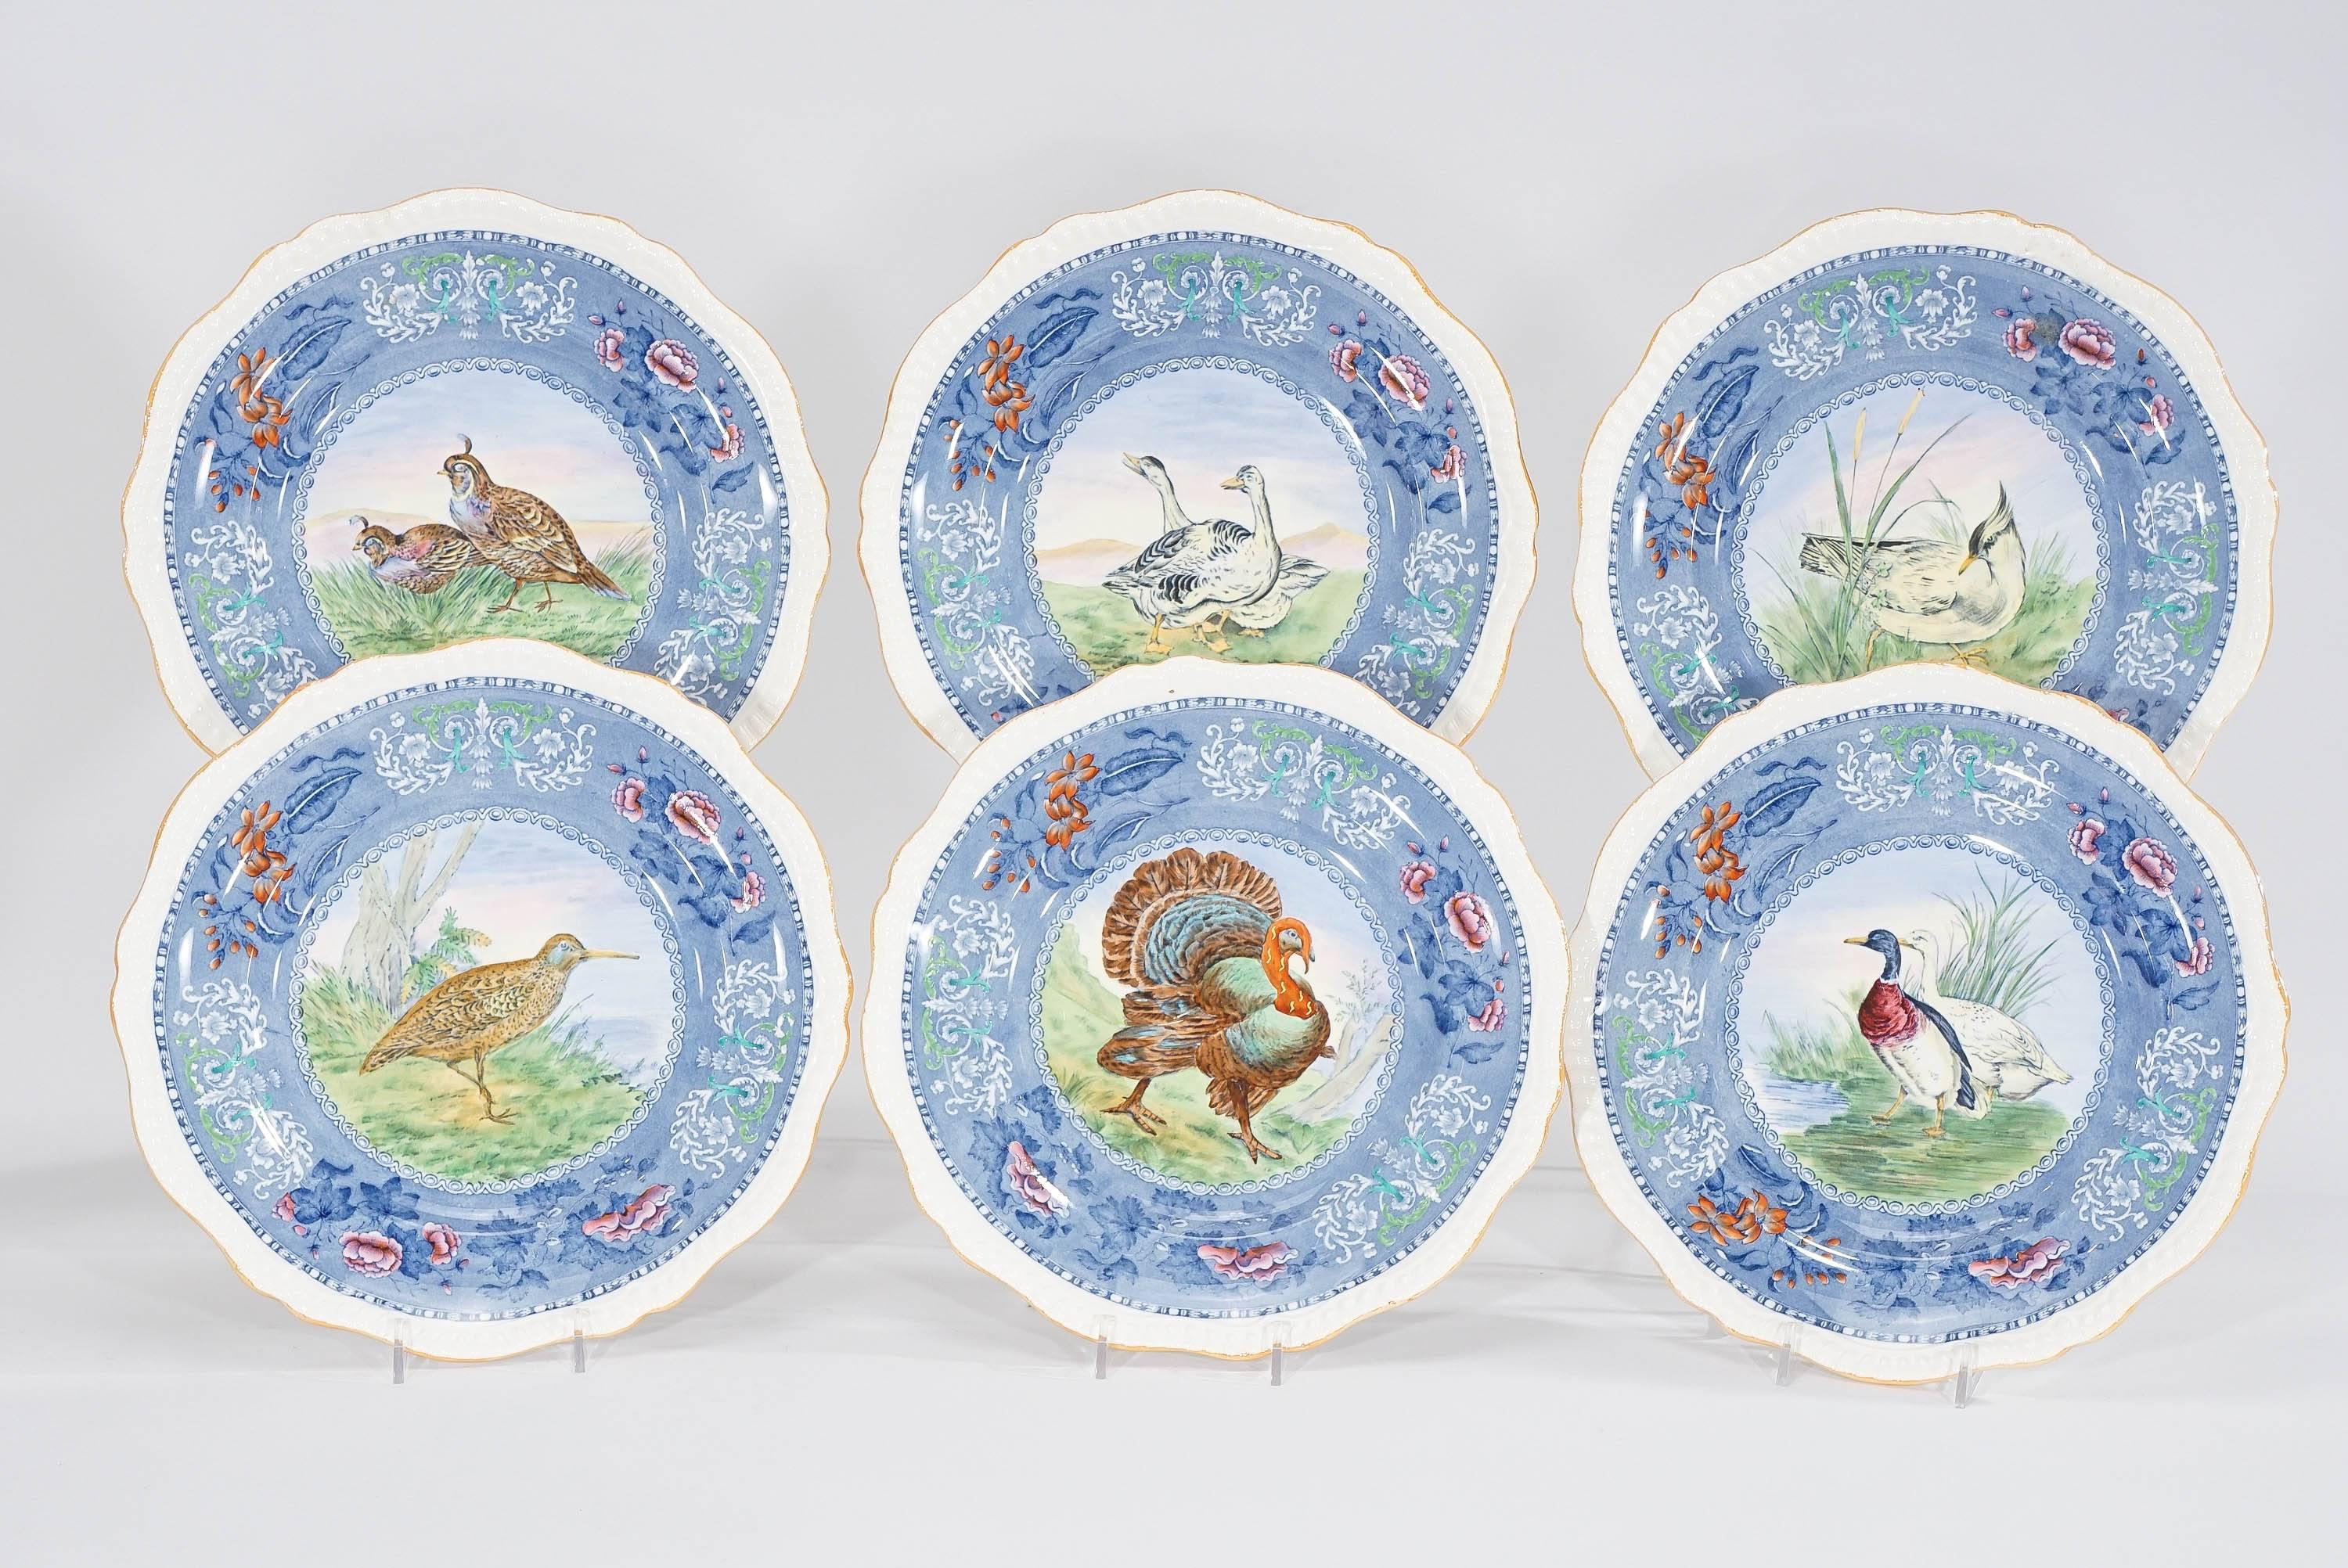 This set of 12 Copeland Spode dinner plates features a different game bird poised in their natural settings on each plate. The unusual French Blue borders are framed with a white gadroon shaped rim for an unusual effect. The transfer decoration is